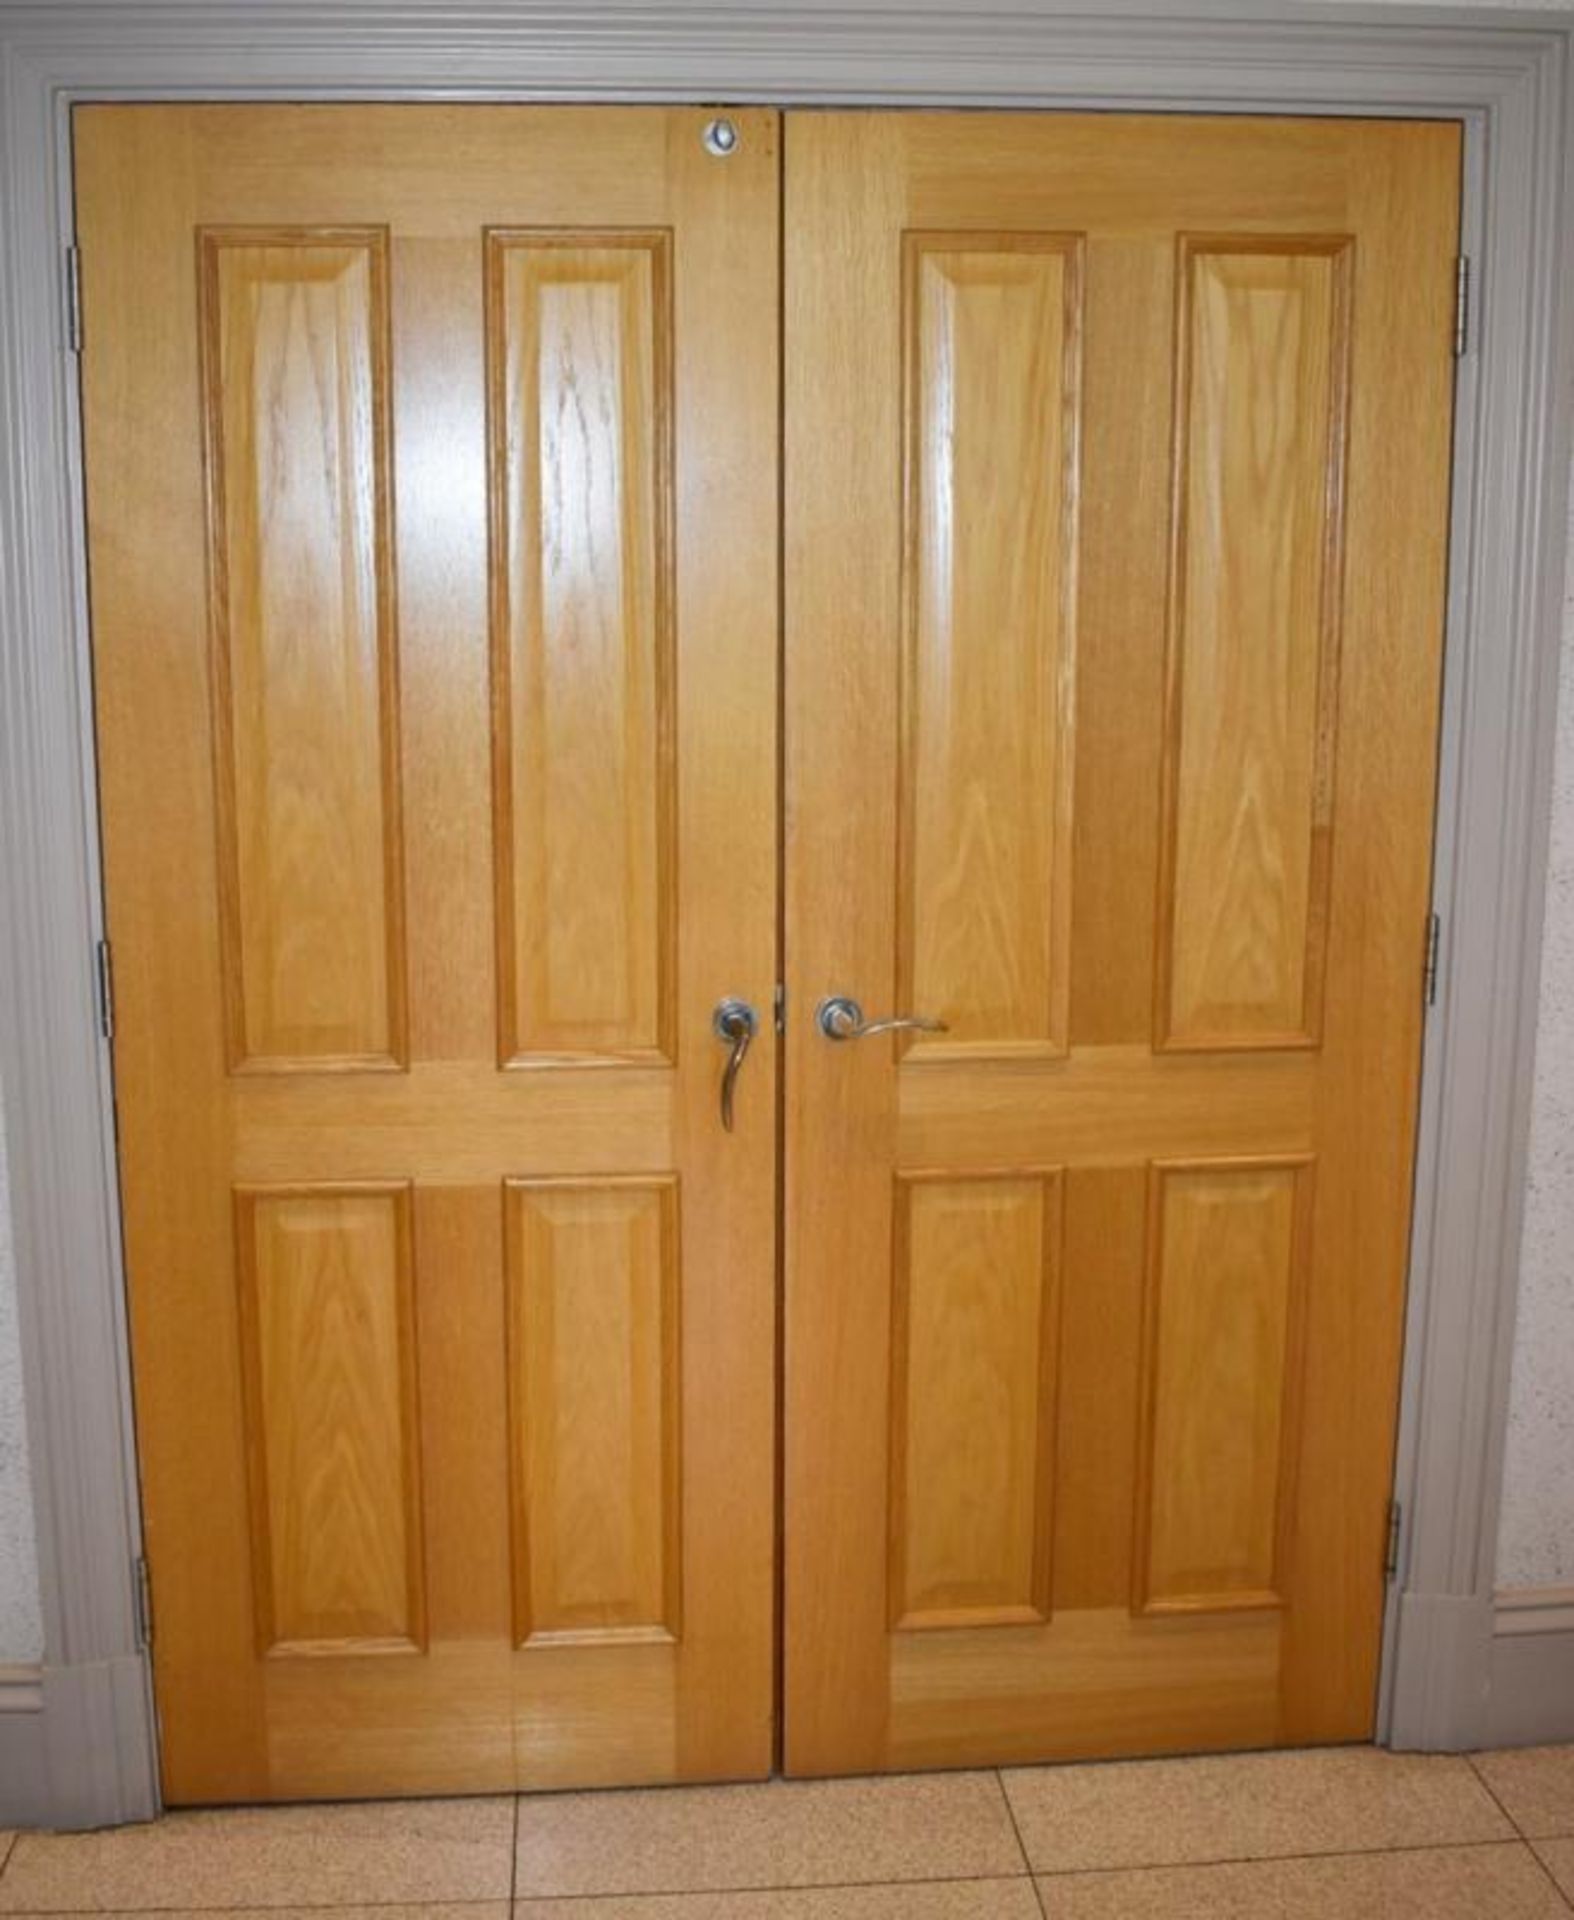 A Pair Of High Quality Internal Wooden Doors - Dimensions Of Each (approx): H200 x W75 x 7cm - Ref: